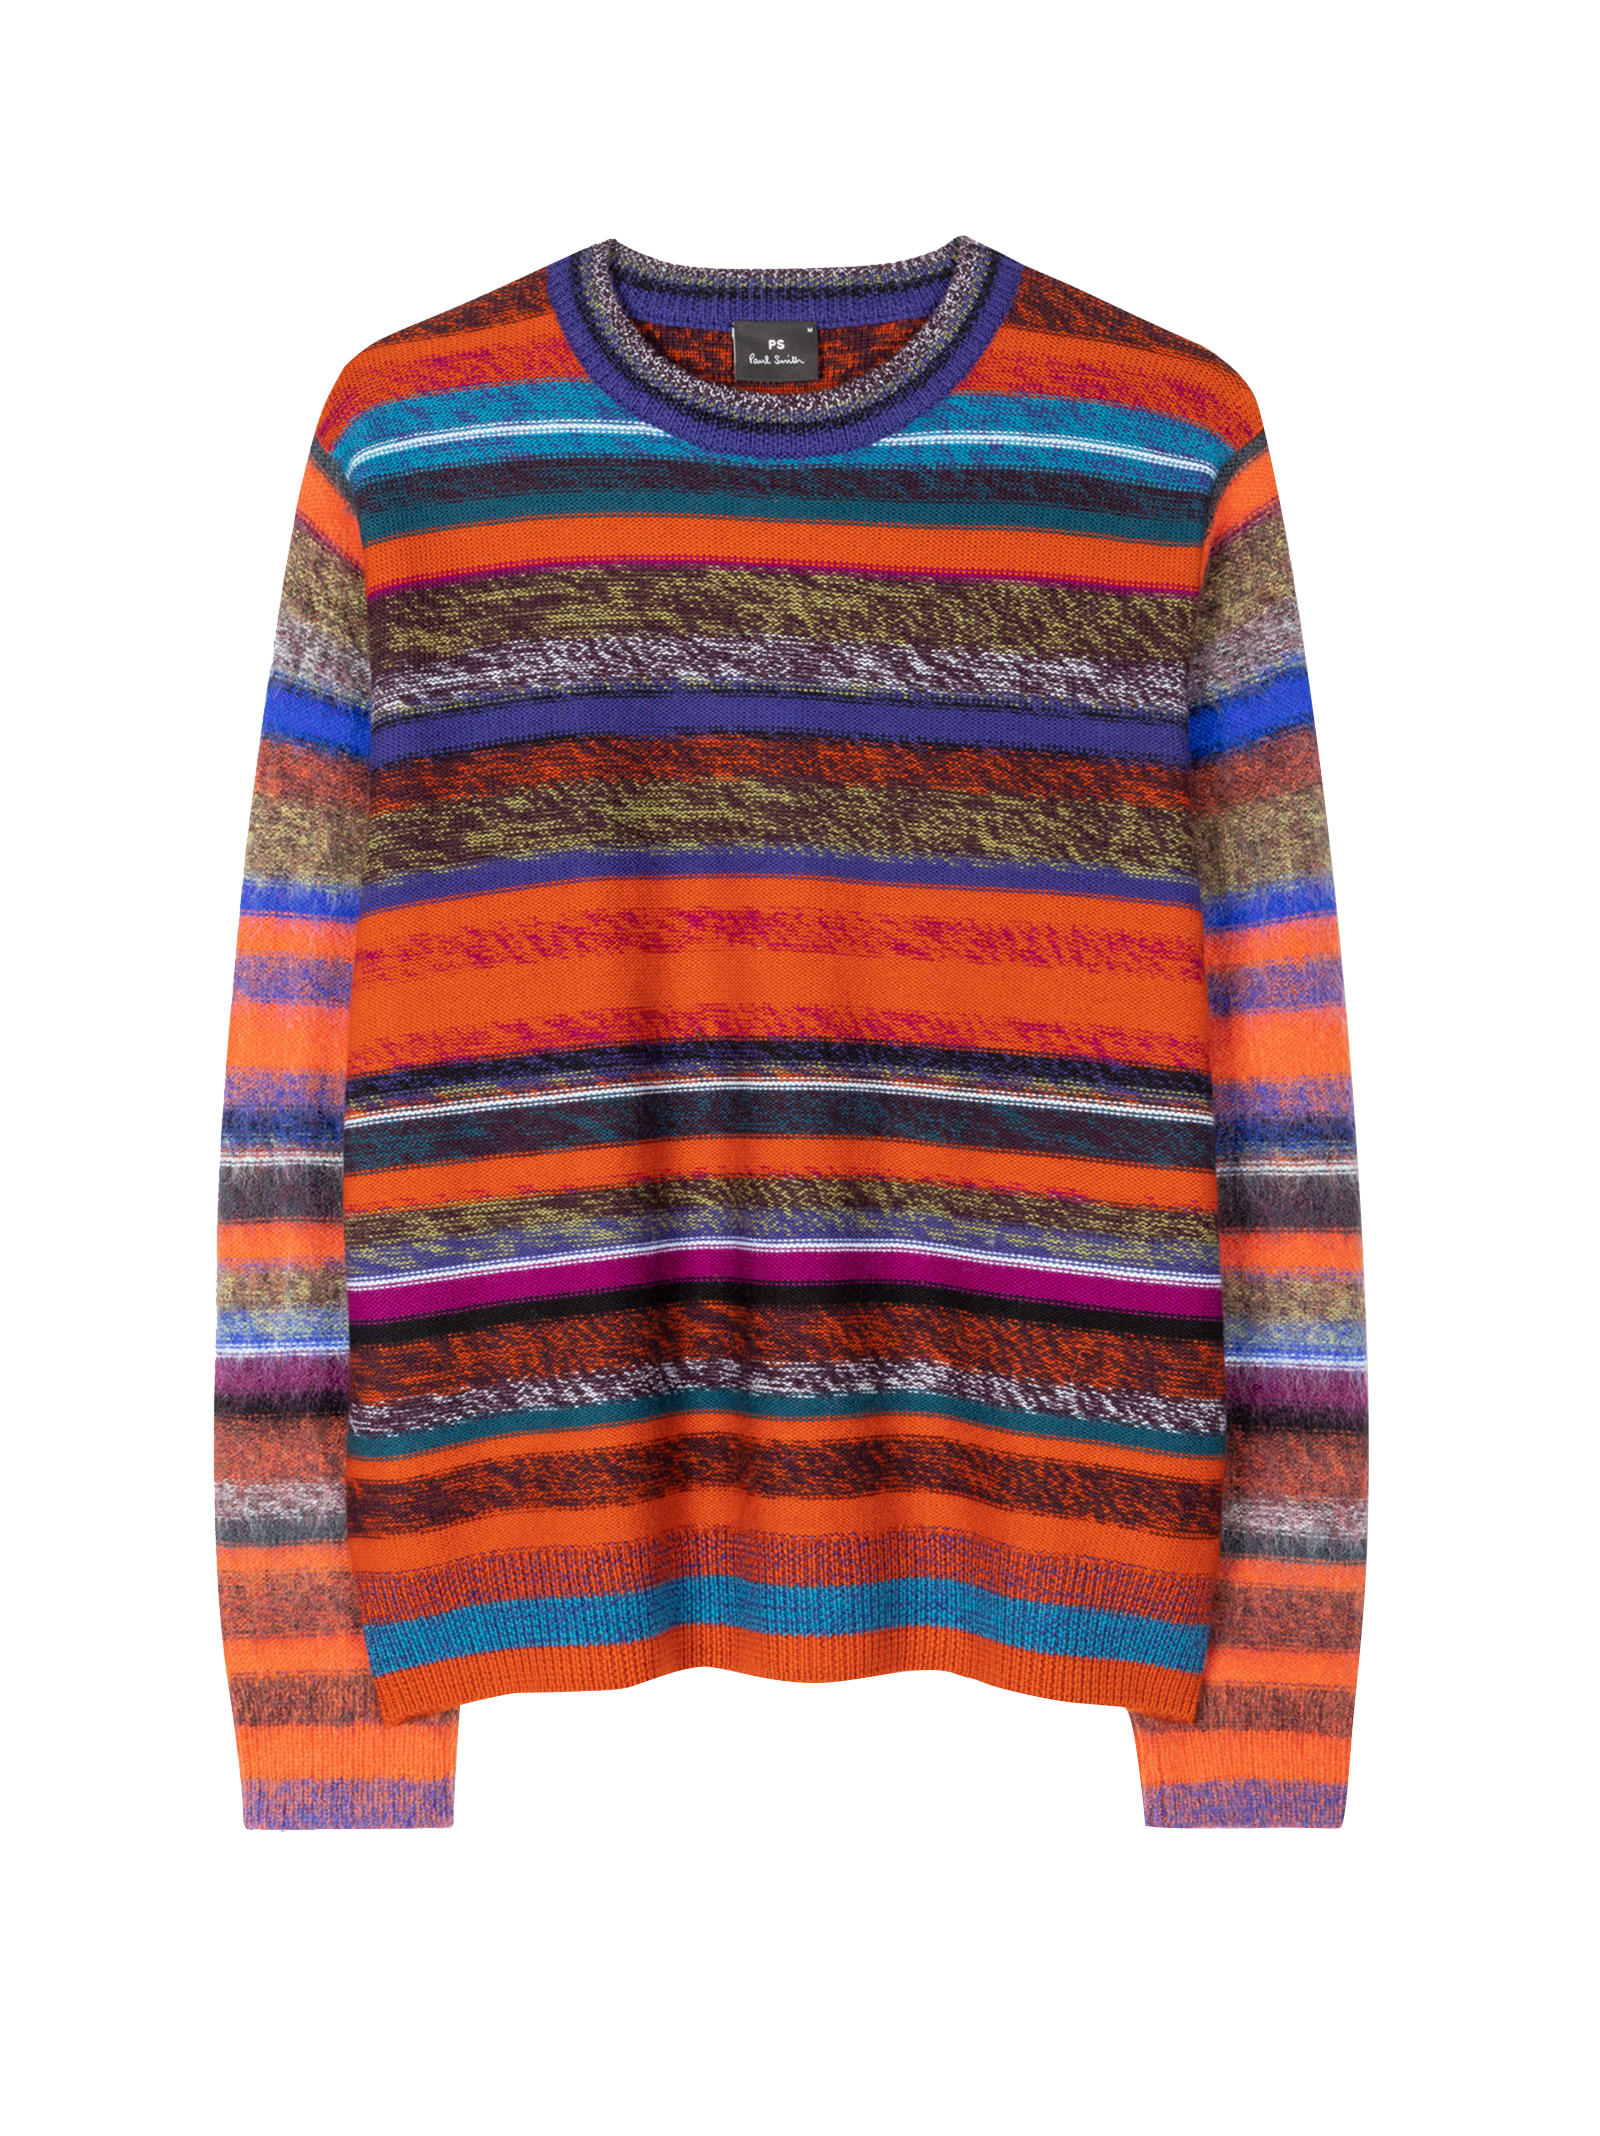 PS by Paul Smith Painted Stripe Sweater